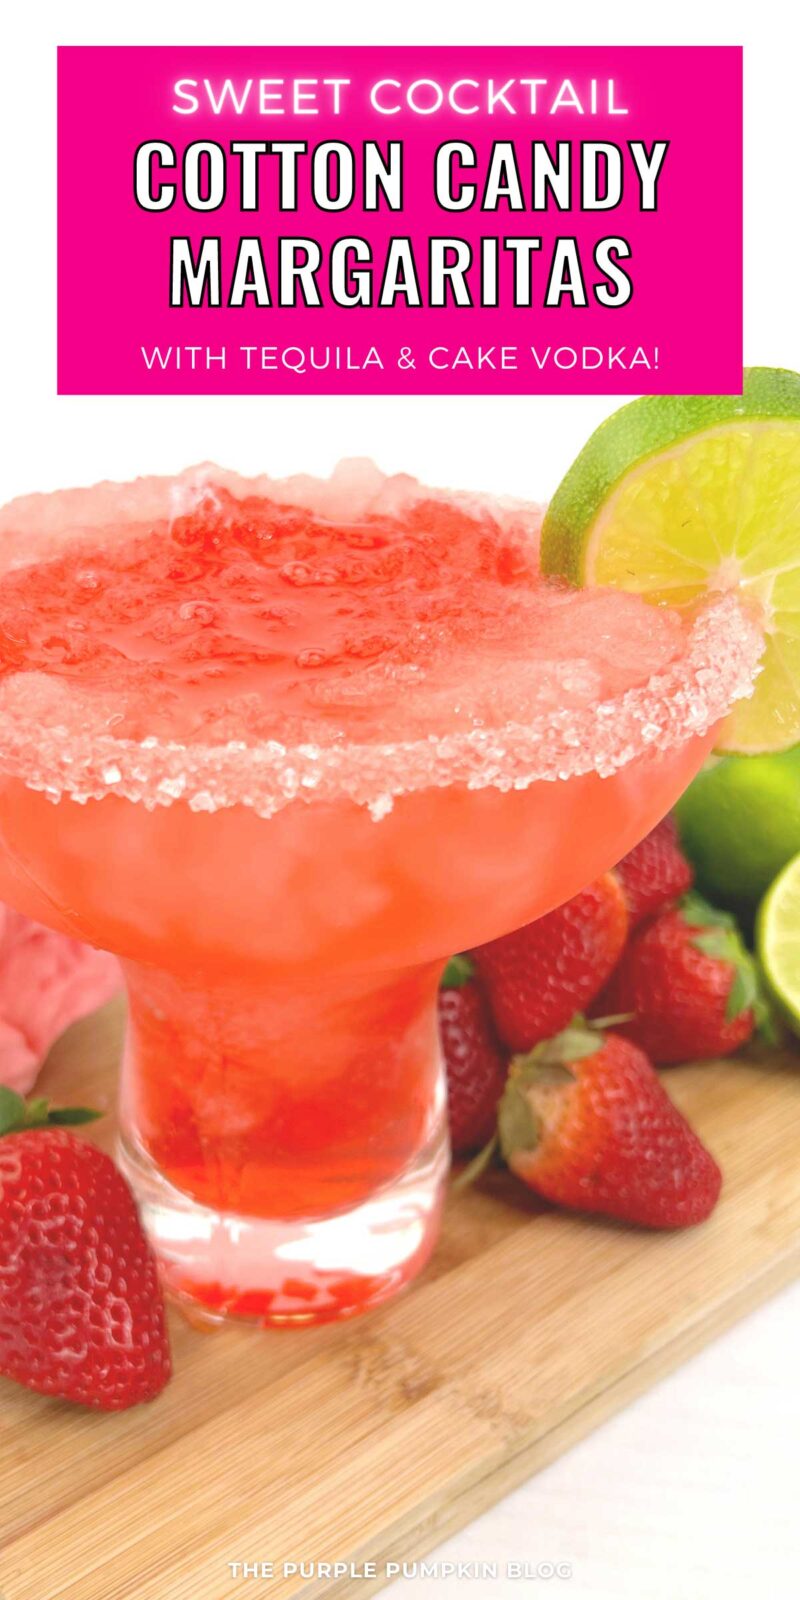 Cotton Candy Margaritas with Tequila & Cake Vodka